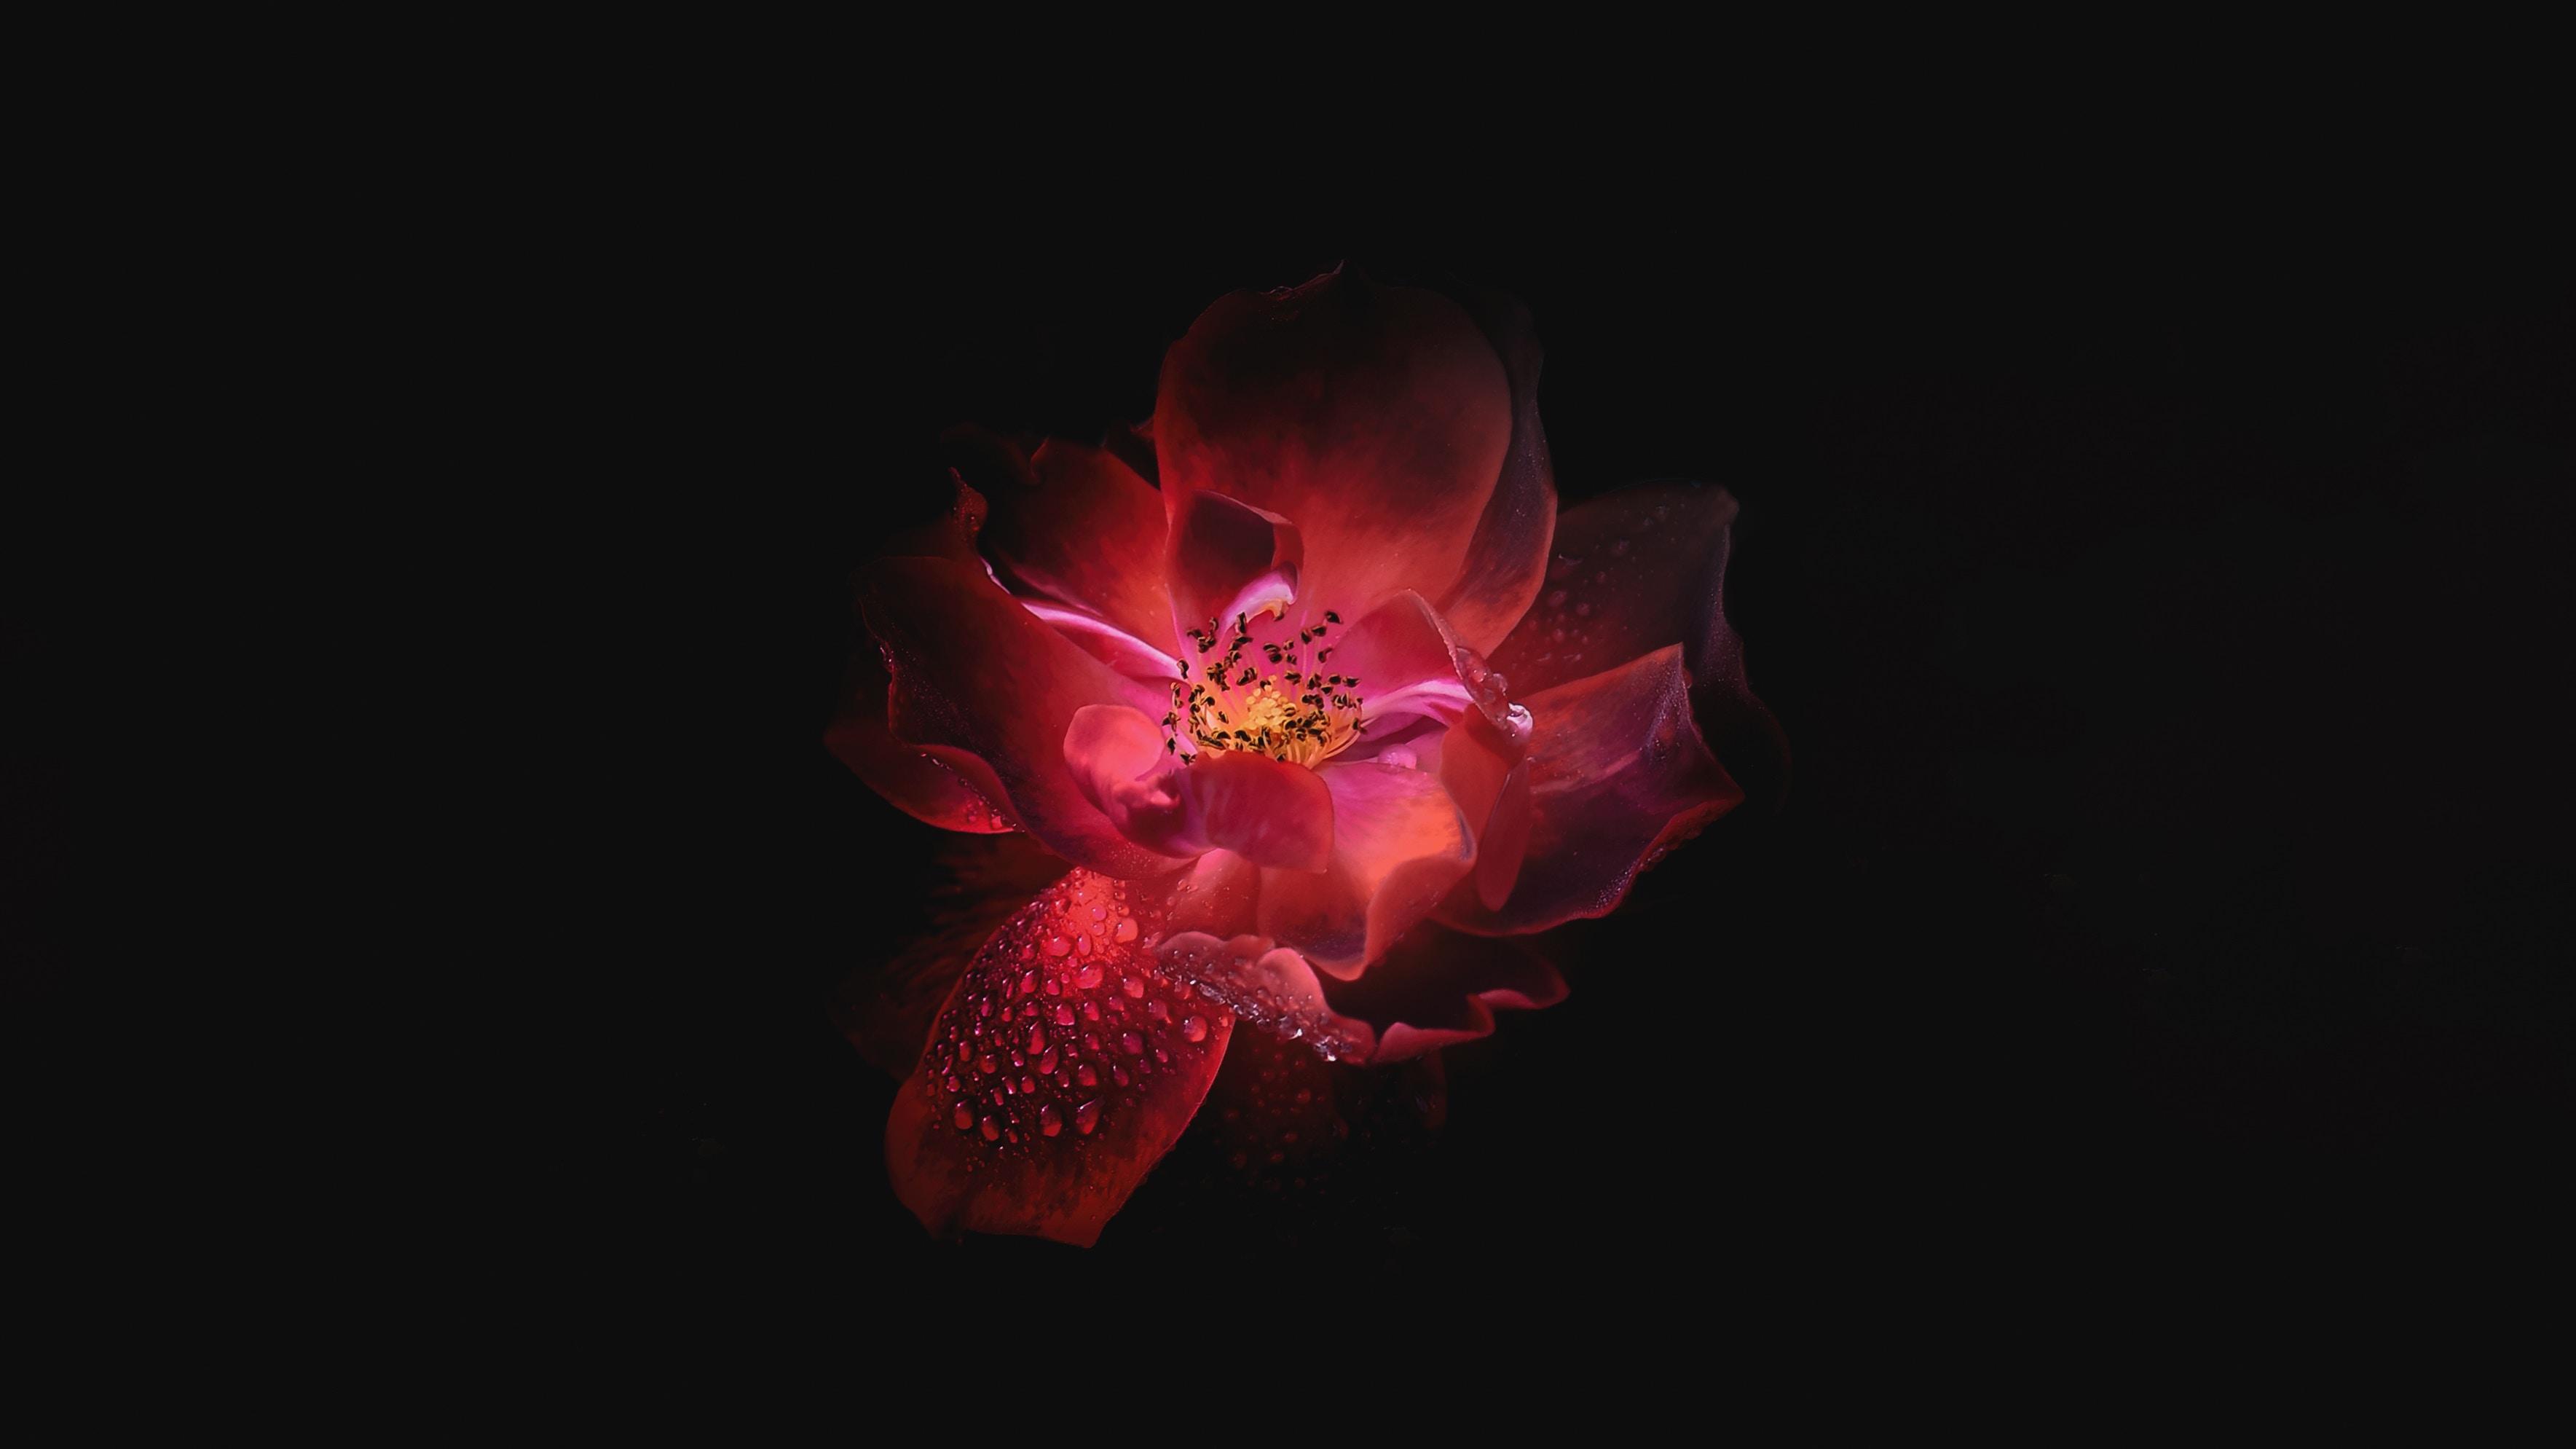 Flower Oled 4k, HD Flowers, 4k Wallpaper, Image, Background, Photo and Picture